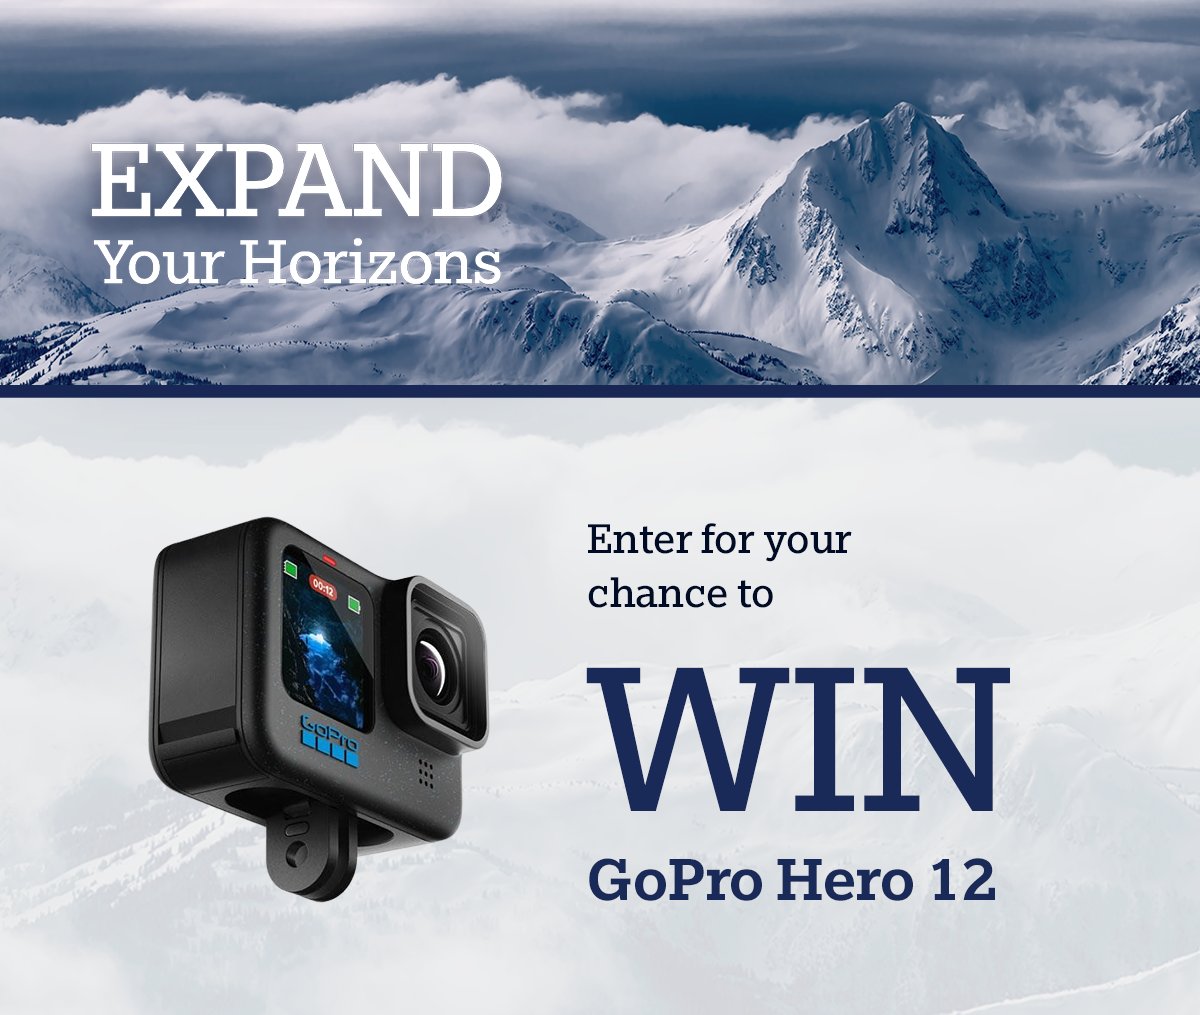 #ExpandYourHorizons with innovative payment solutions from FIRST Canada. Visit our booth at the IBAA Convention on May 5 to 7 and enter for your chance to win a GoPro Hero 12. Don’t miss your chance to learn about the future of insurance payments. ow.ly/Nini50Rilq9